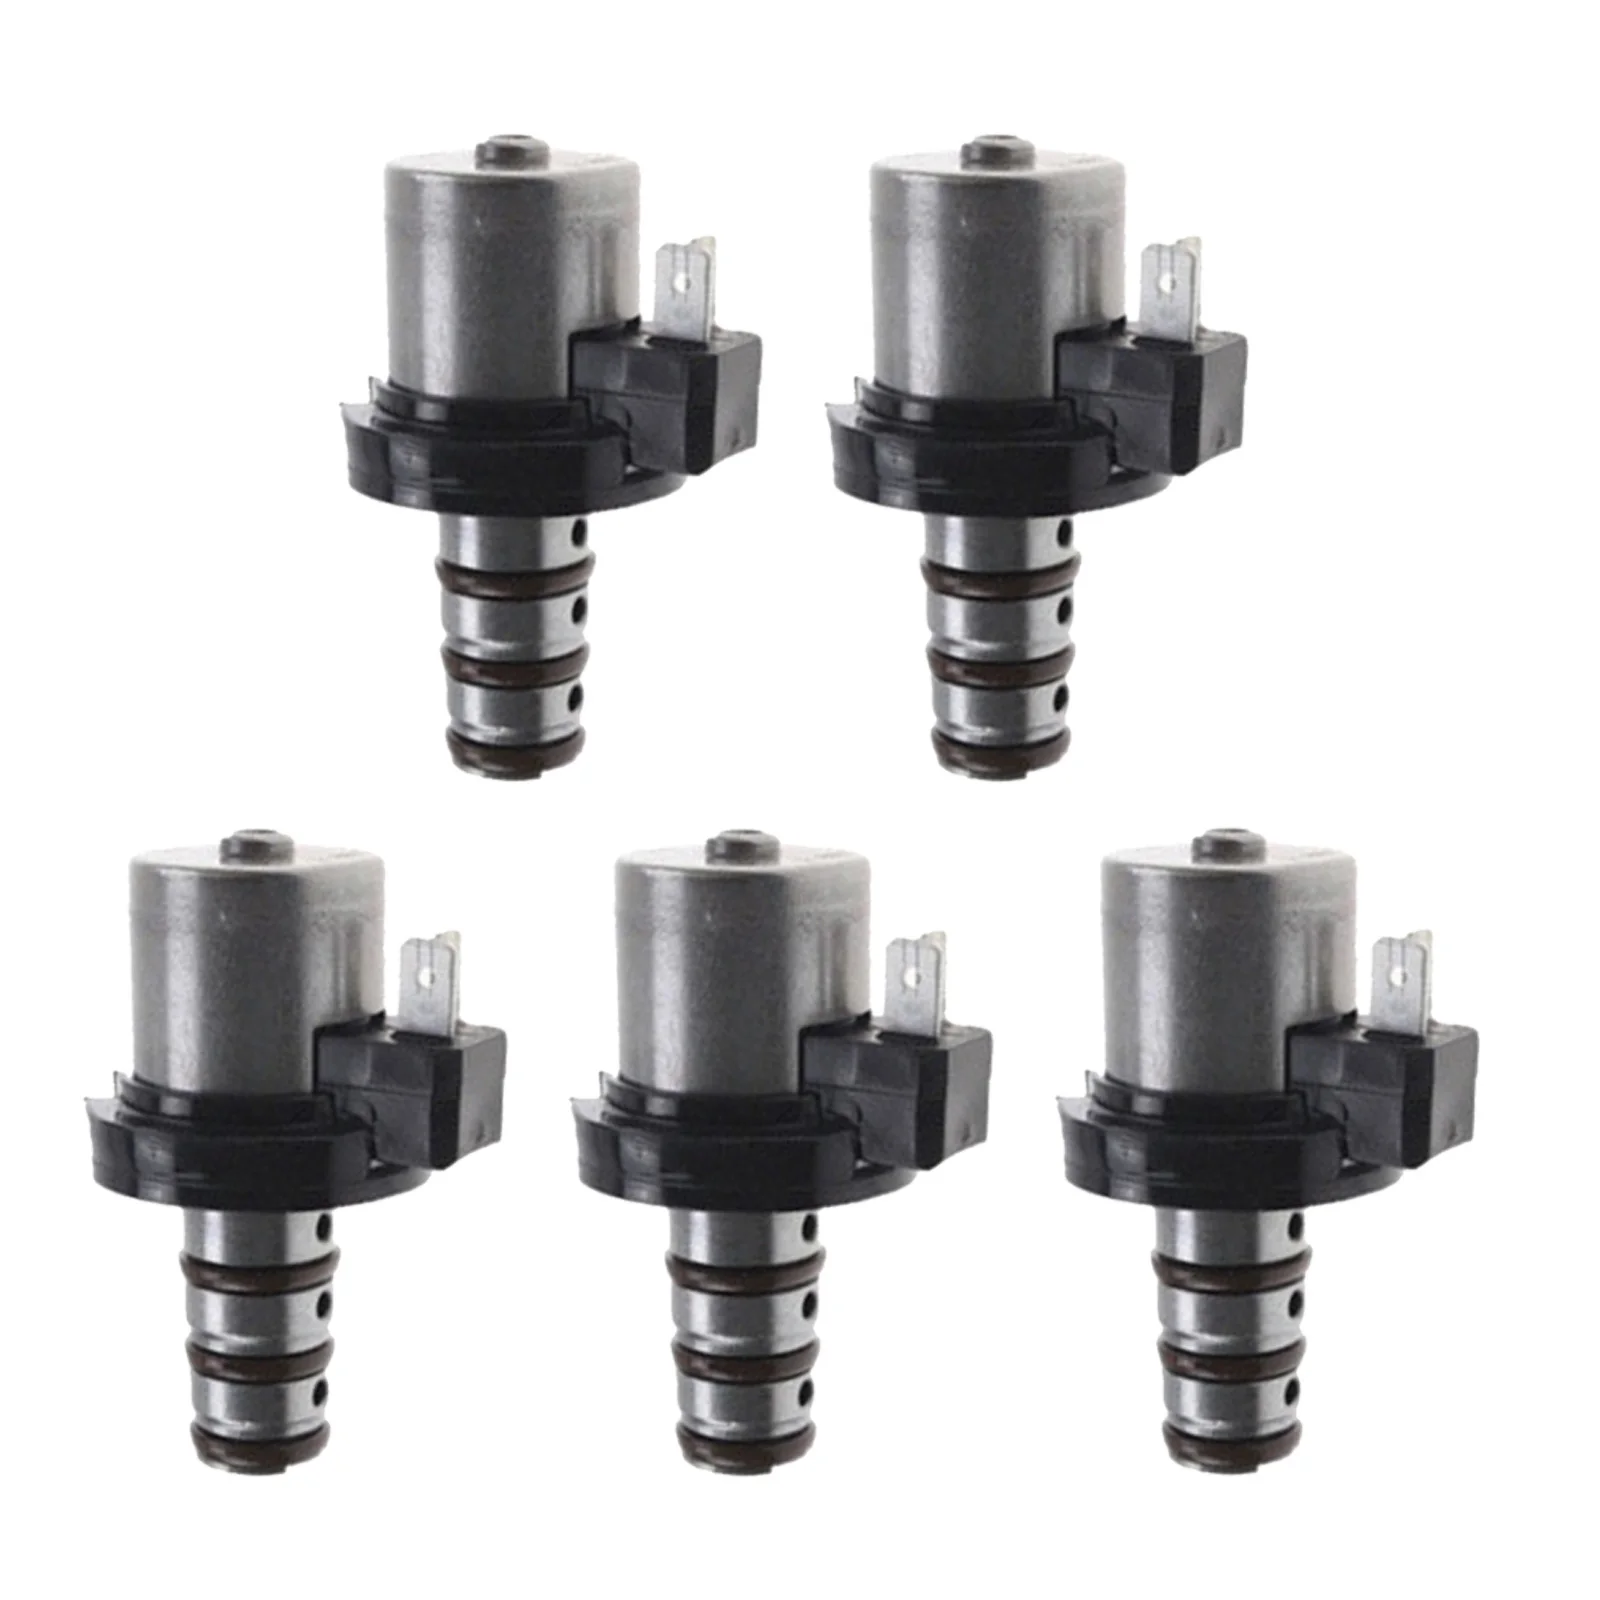 5x Transmission Solenoid Valve Set F4A-41 R4A51 for Hyundai for Kia for Mitsubishi for Chrysler